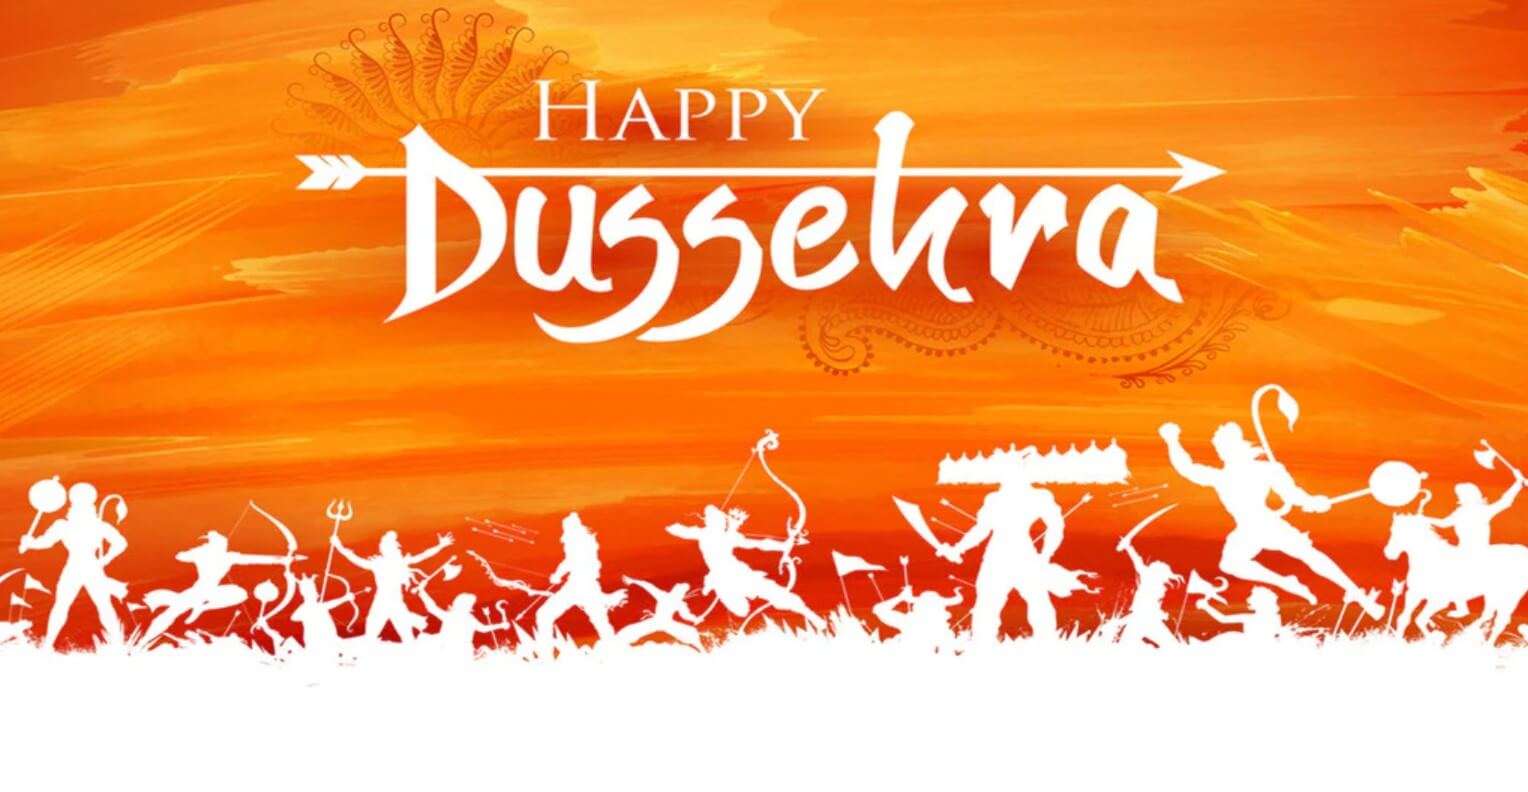 Happy Dussehra Images 2020, Wishes, Quotes, WhatsApp Status for ...